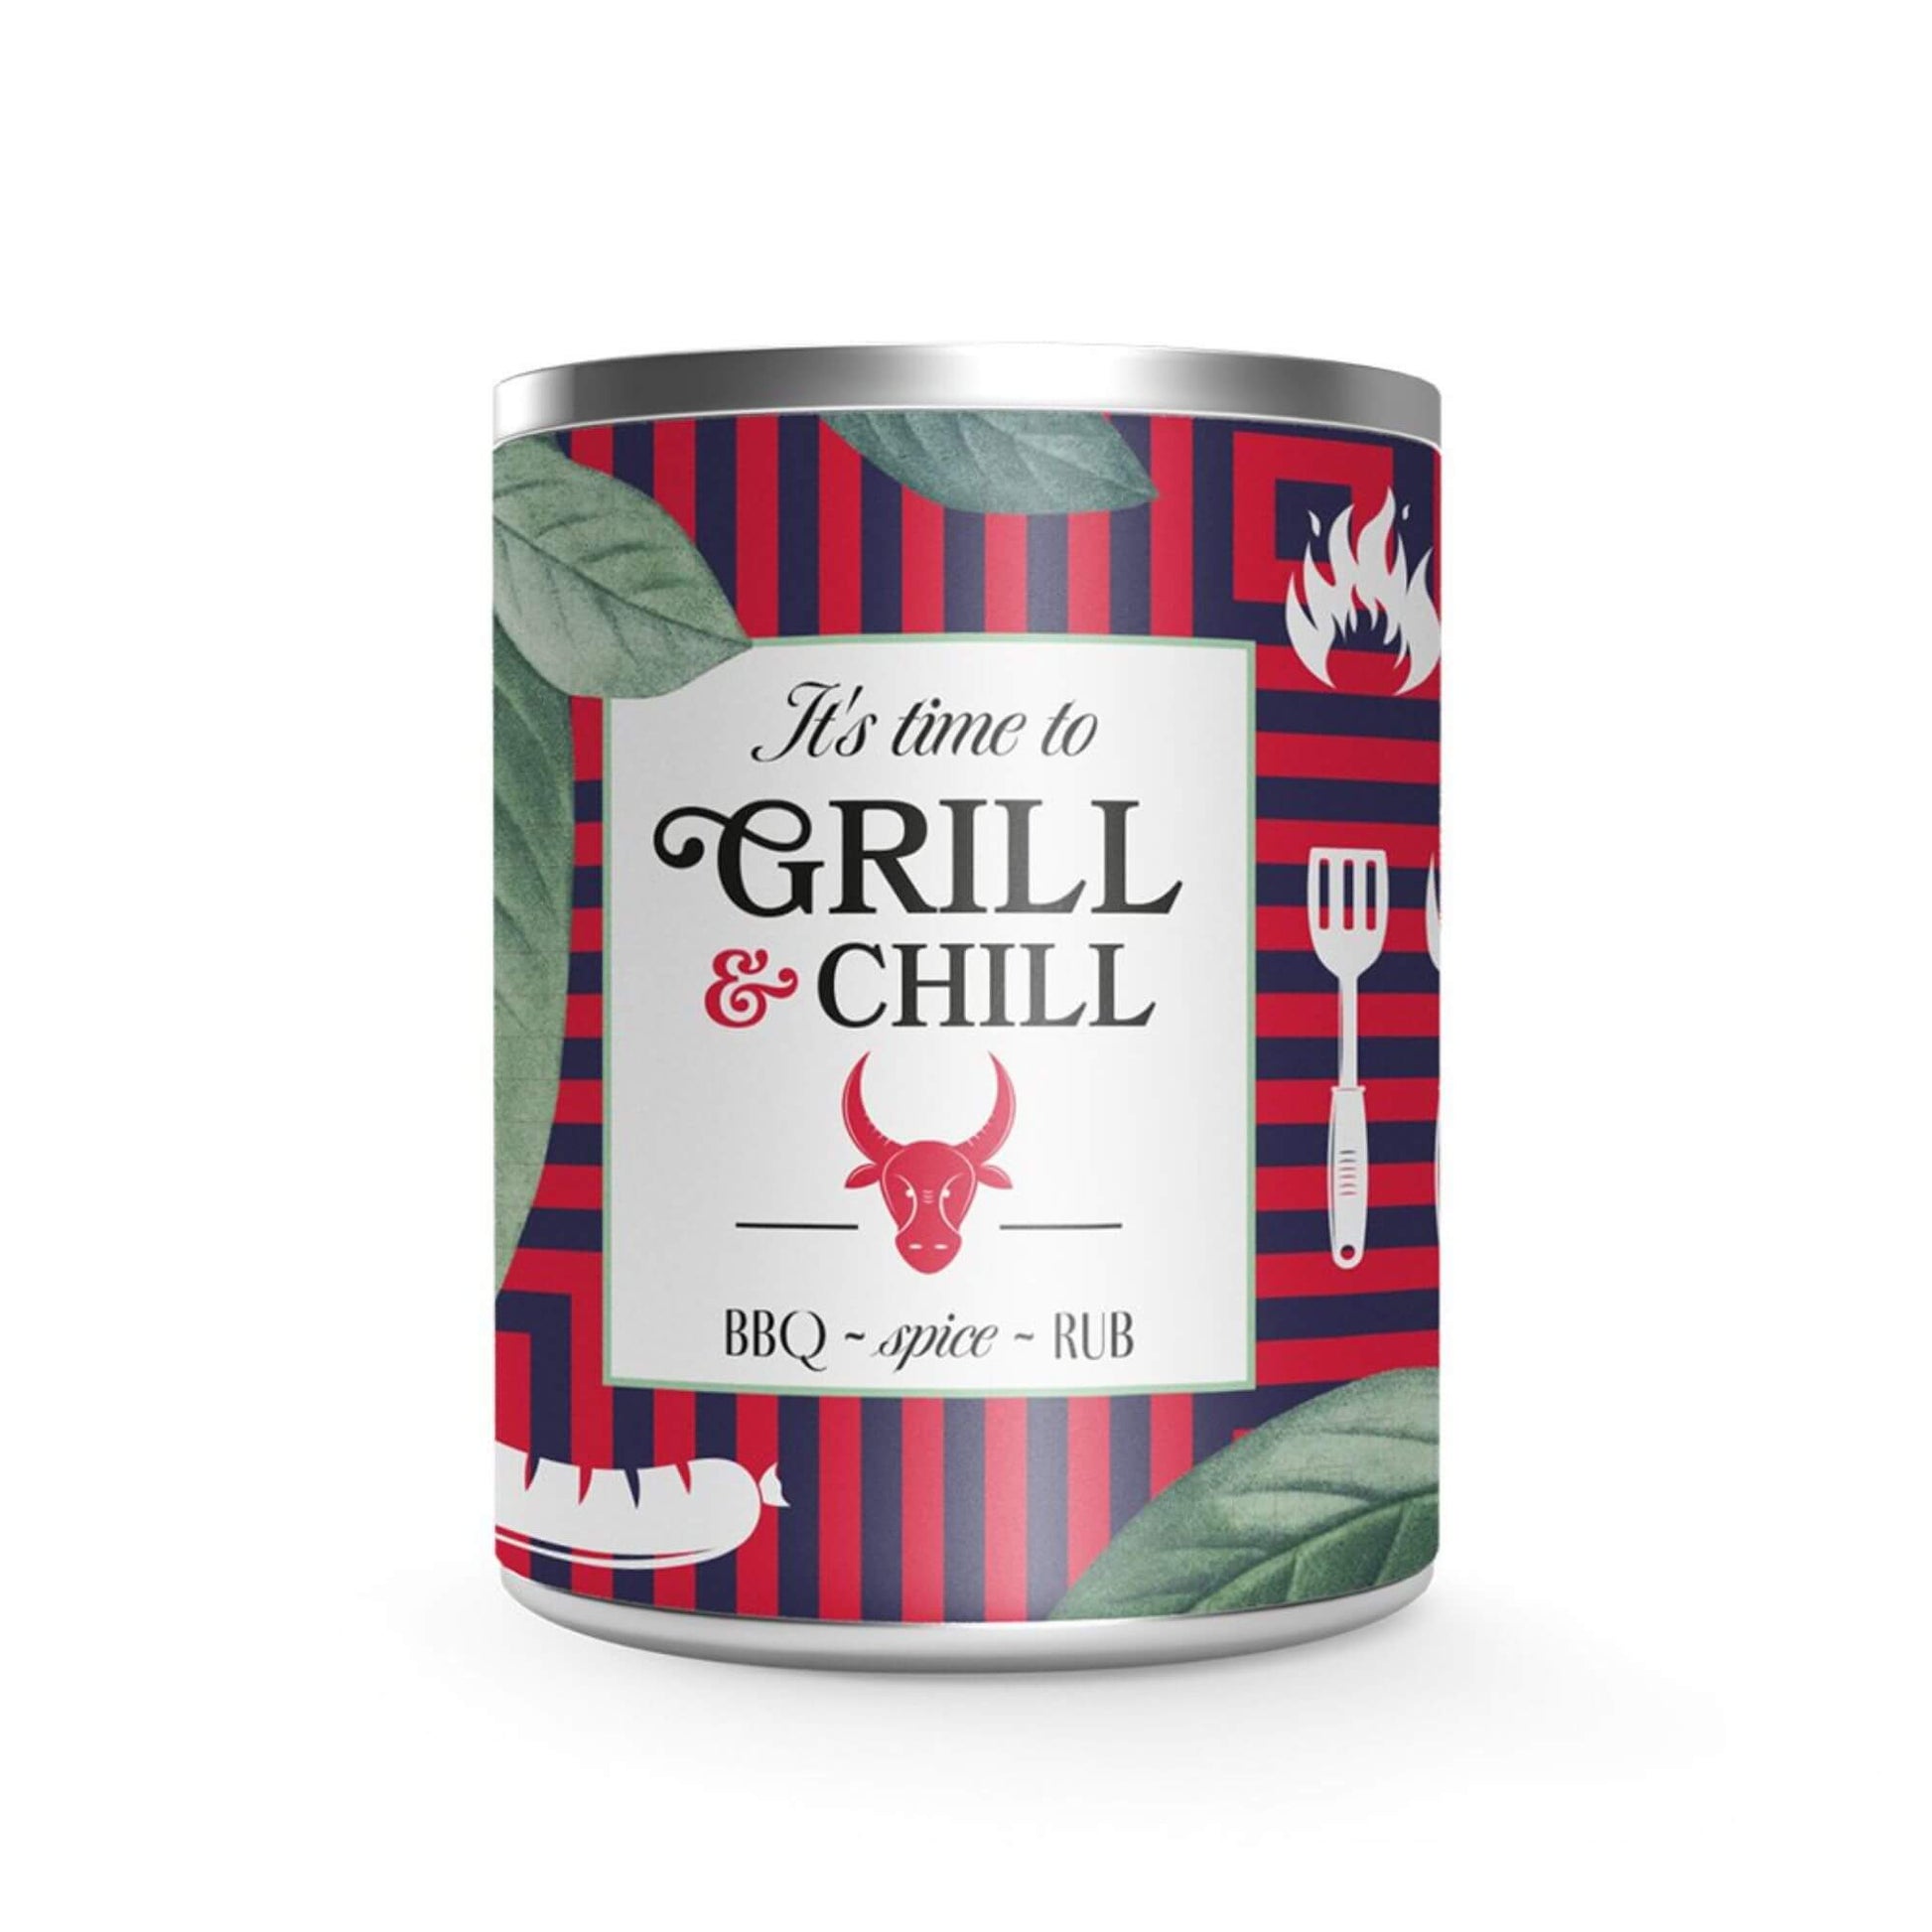 Barbecue kruidenmix in cadeaublik "It's time to grill and chill"